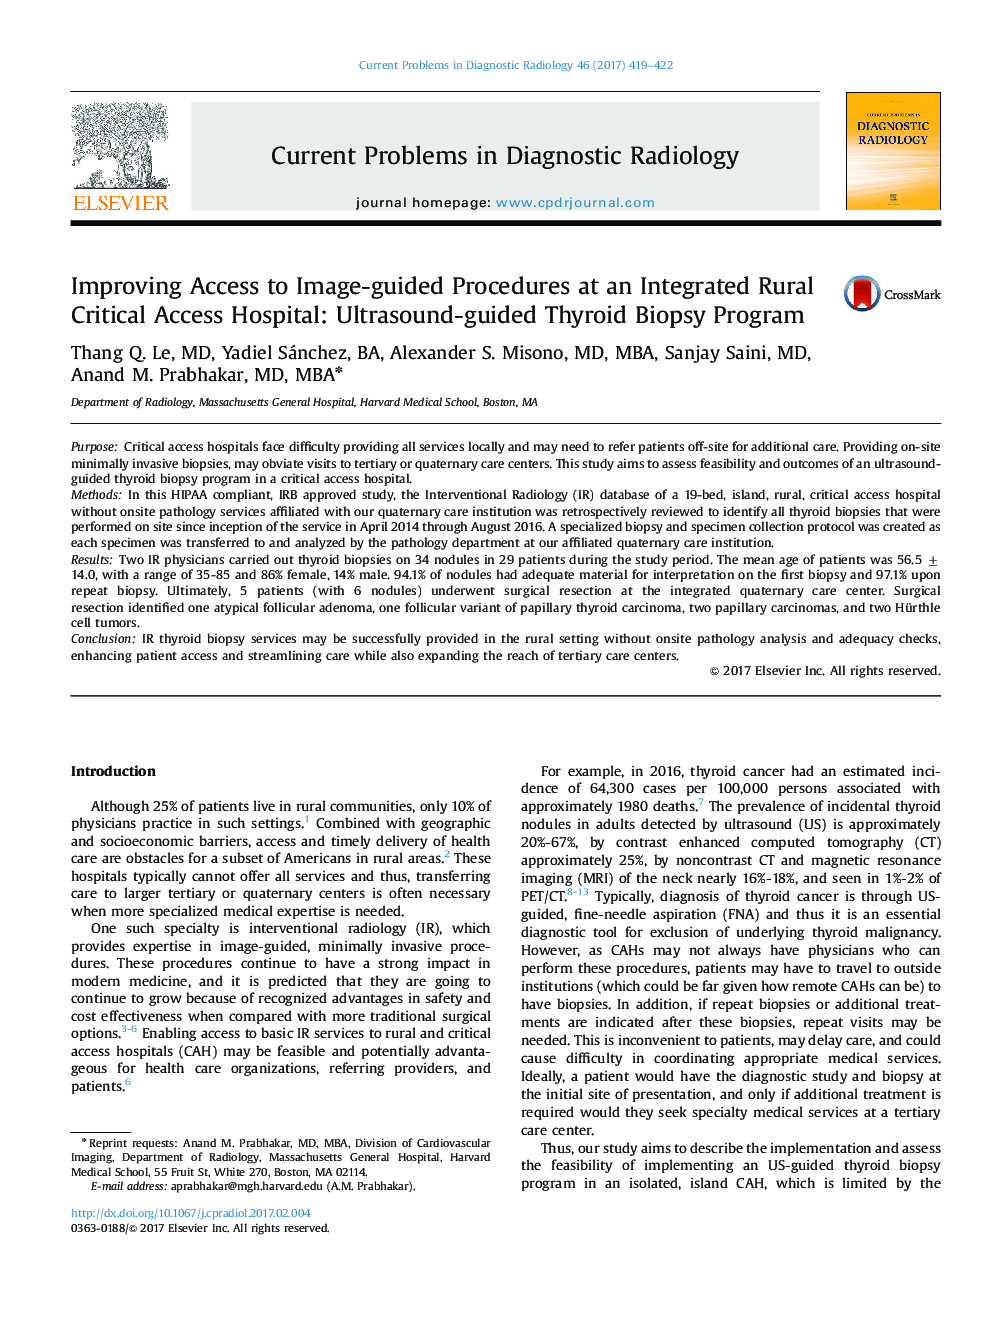 Improving Access to Image-guided Procedures at an Integrated Rural Critical Access Hospital: Ultrasound-guided Thyroid Biopsy Program